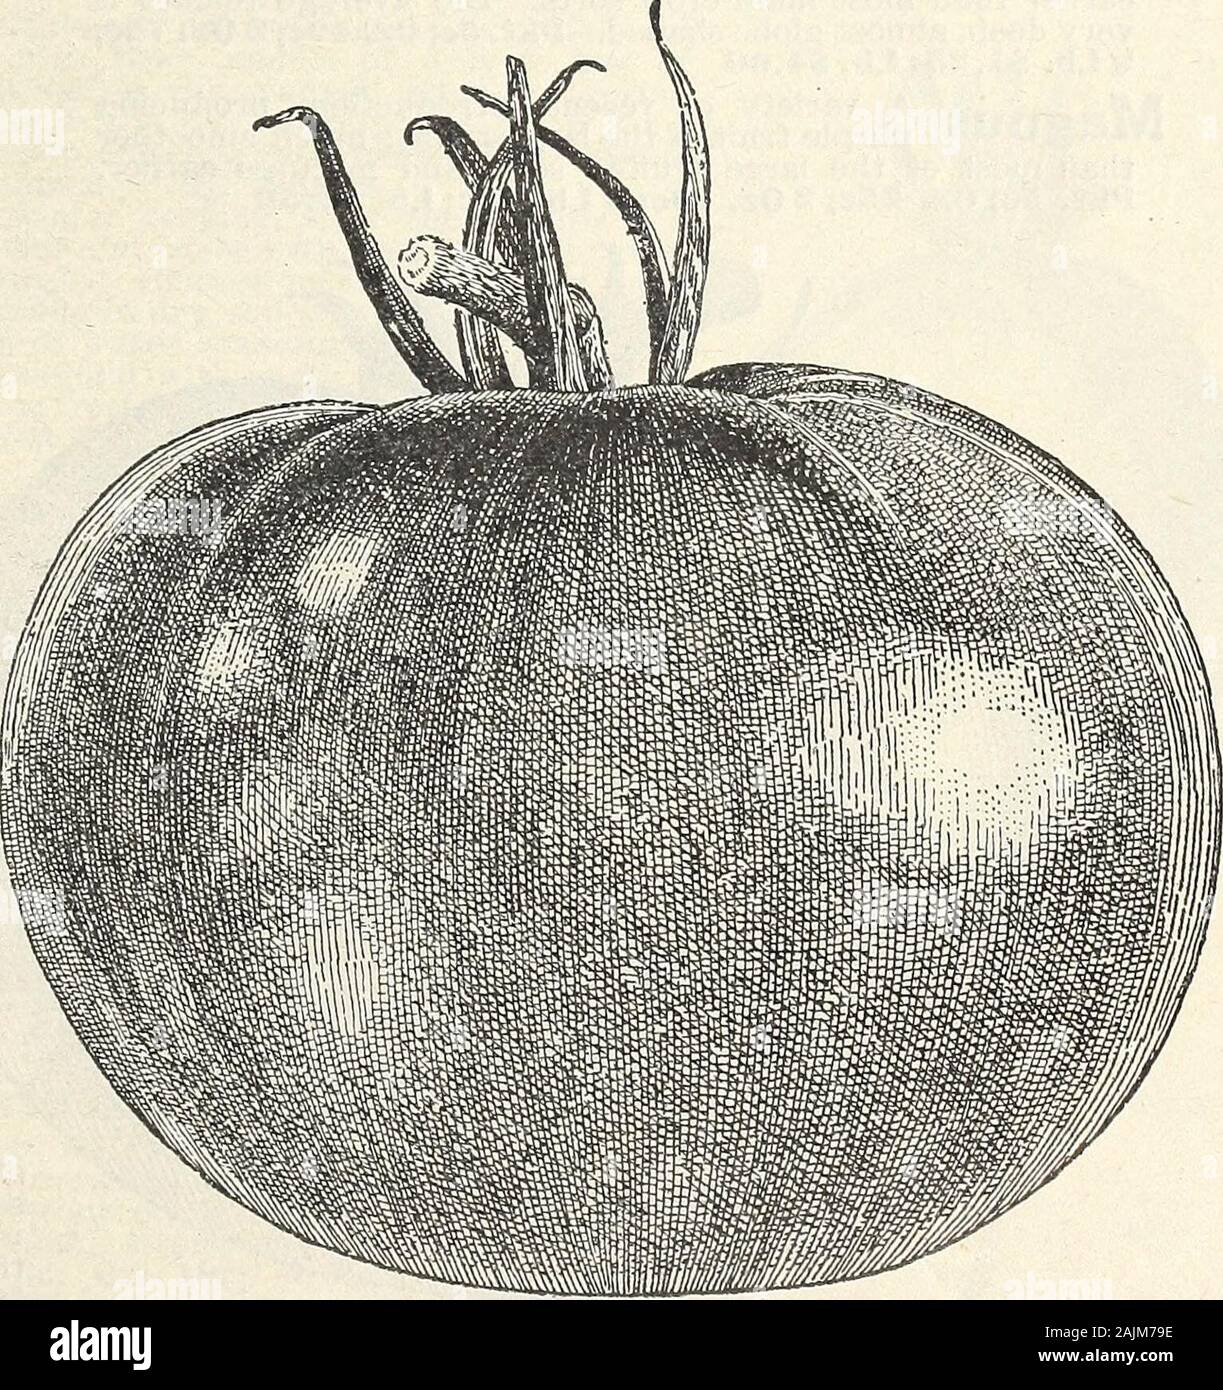 Seed annual 1908 . larger, distinctly smoother, solid and of verygood quality. Early, smooth and of a largesize it is a particularly profitable tomato formarket gardeners. Pkt. 5c; Oz.SOc; 3 0z. 55c;%Lb. $1.00; Lb. $3.00 We considerthis one ofthe very best early tomatoes yet introduced.Vine vigorous and very productive. Fruitdeep scarlet-red, smooth, of large size andexcellent quality. Pkt. 5c; Oz.SOc. 3 Oz.55c;h Lb. $1.00; Lb. $3.00 Chalks Early Jewel Farlv Mir&gt;liia-an One of the best second E-ariy iviicnigan ^aviy sorts, its first fruits are very early and the vines continuefor a long tim Stock Photo